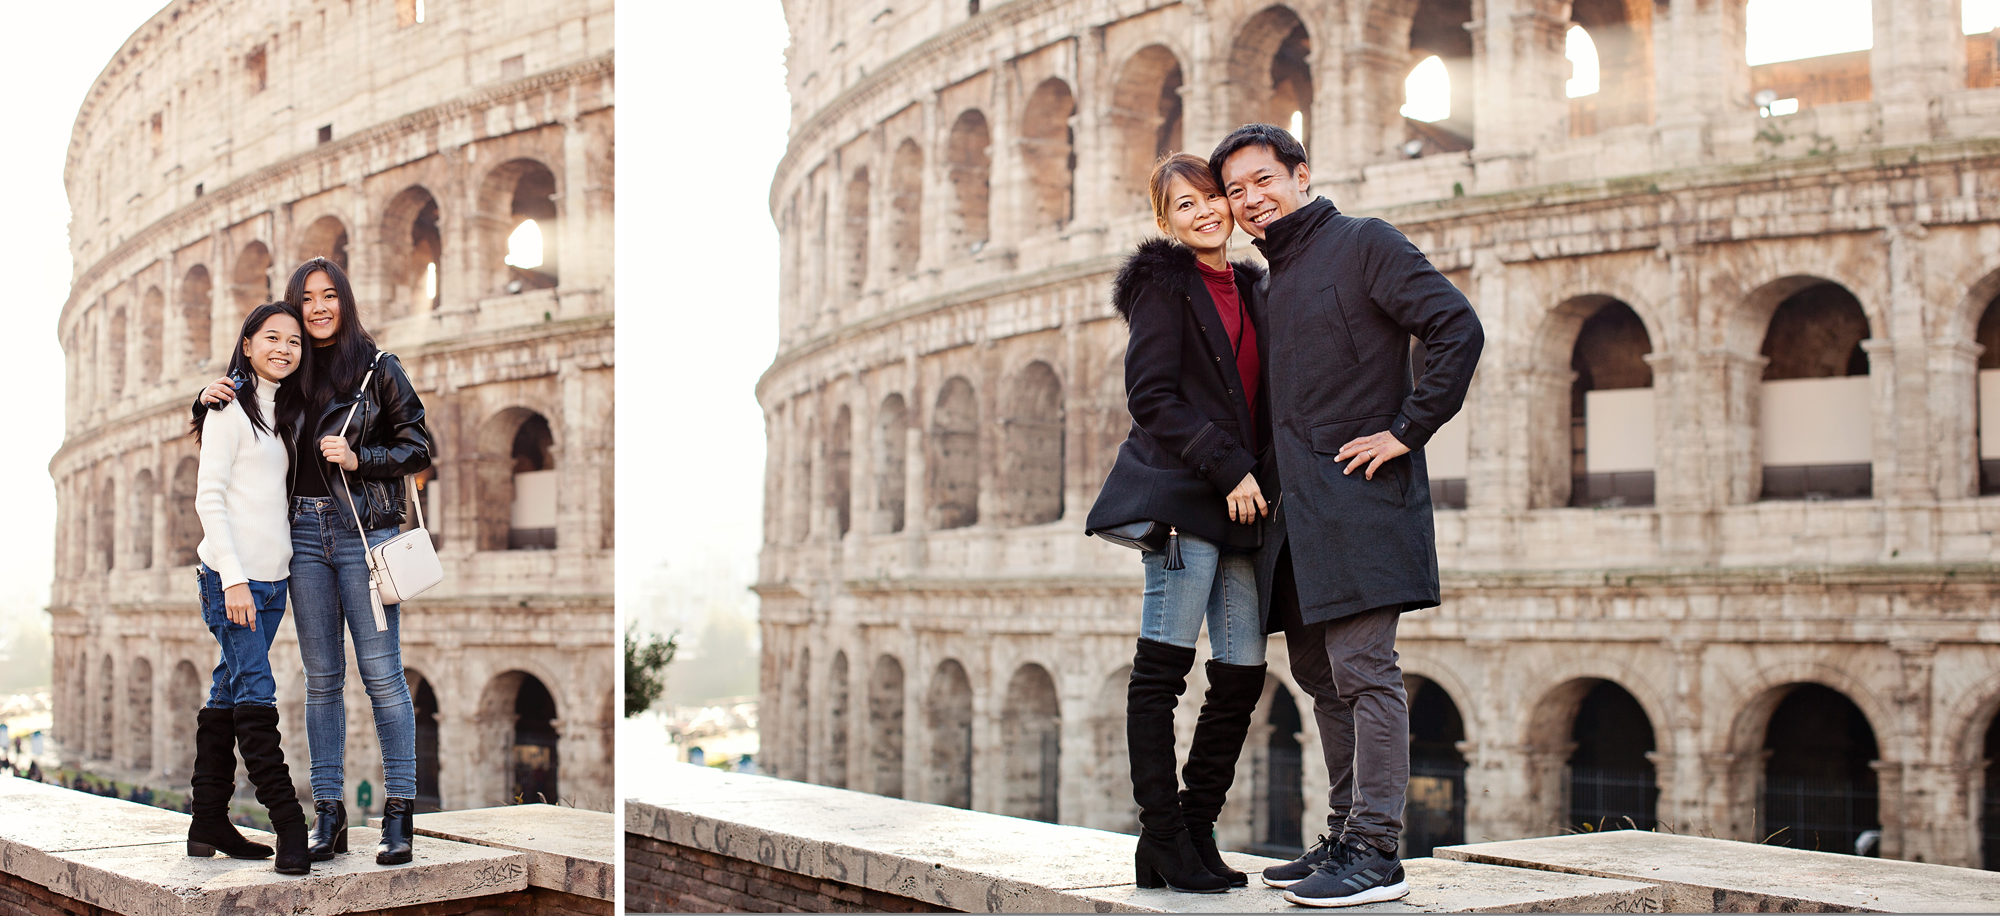 Honeymoon, vacation, family, engagement, maternity, wedding, love story individual and solo photoshoots in Rome, Italy by photographer Tricia Anne Photography | Rome Photographer, vacation, tripadvisor, instagram, fun, married, bride, groom, love, story, photography, session, photoshoot, wedding photographer, mywed, vacation photographer, engagement photo, honeymoon photoshoot, rome honeymoon, rome wedding, elopement in Rome, honeymoon photographer rome, Family Photo shoot Rome, Rome Family Photography, Rome Family Photographer, Vatican Photo shoot, Vatican Photography, Colosseum photo shoot, Rome doors, Rome Family Photoshoot, Trevi Fountain, Trevi Fountain photo shoot, Trevi Fountain photoshoot, photoshoot at the Trevi Fountain, photo shoot at the Trevi Fountain